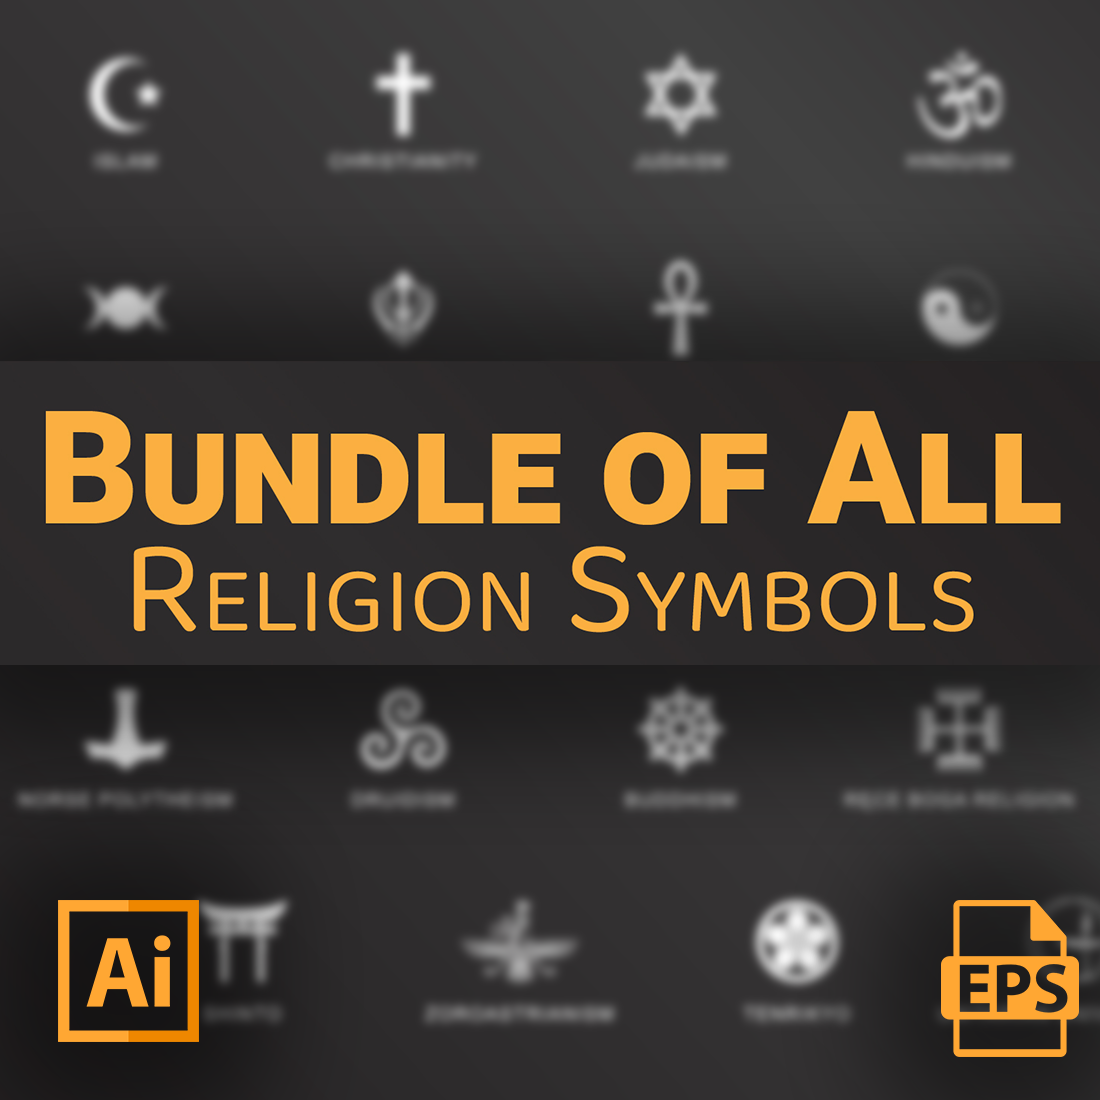 Bundle of All Religious Symbols - Vector Ai and EPS file cover image.